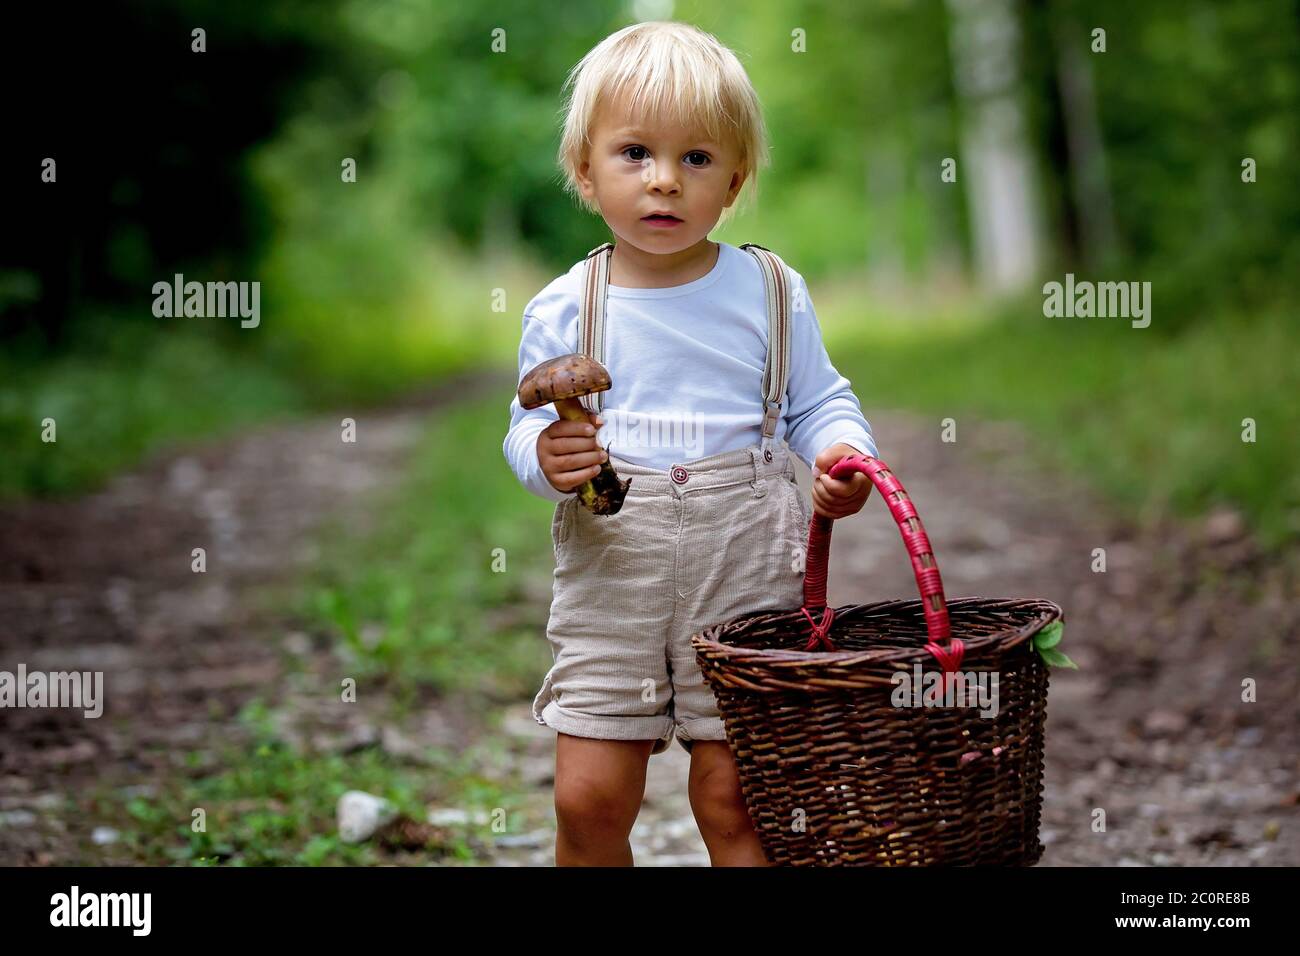 Adorable child, little boy picking mushroom in basket, running happily in forest Stock Photo